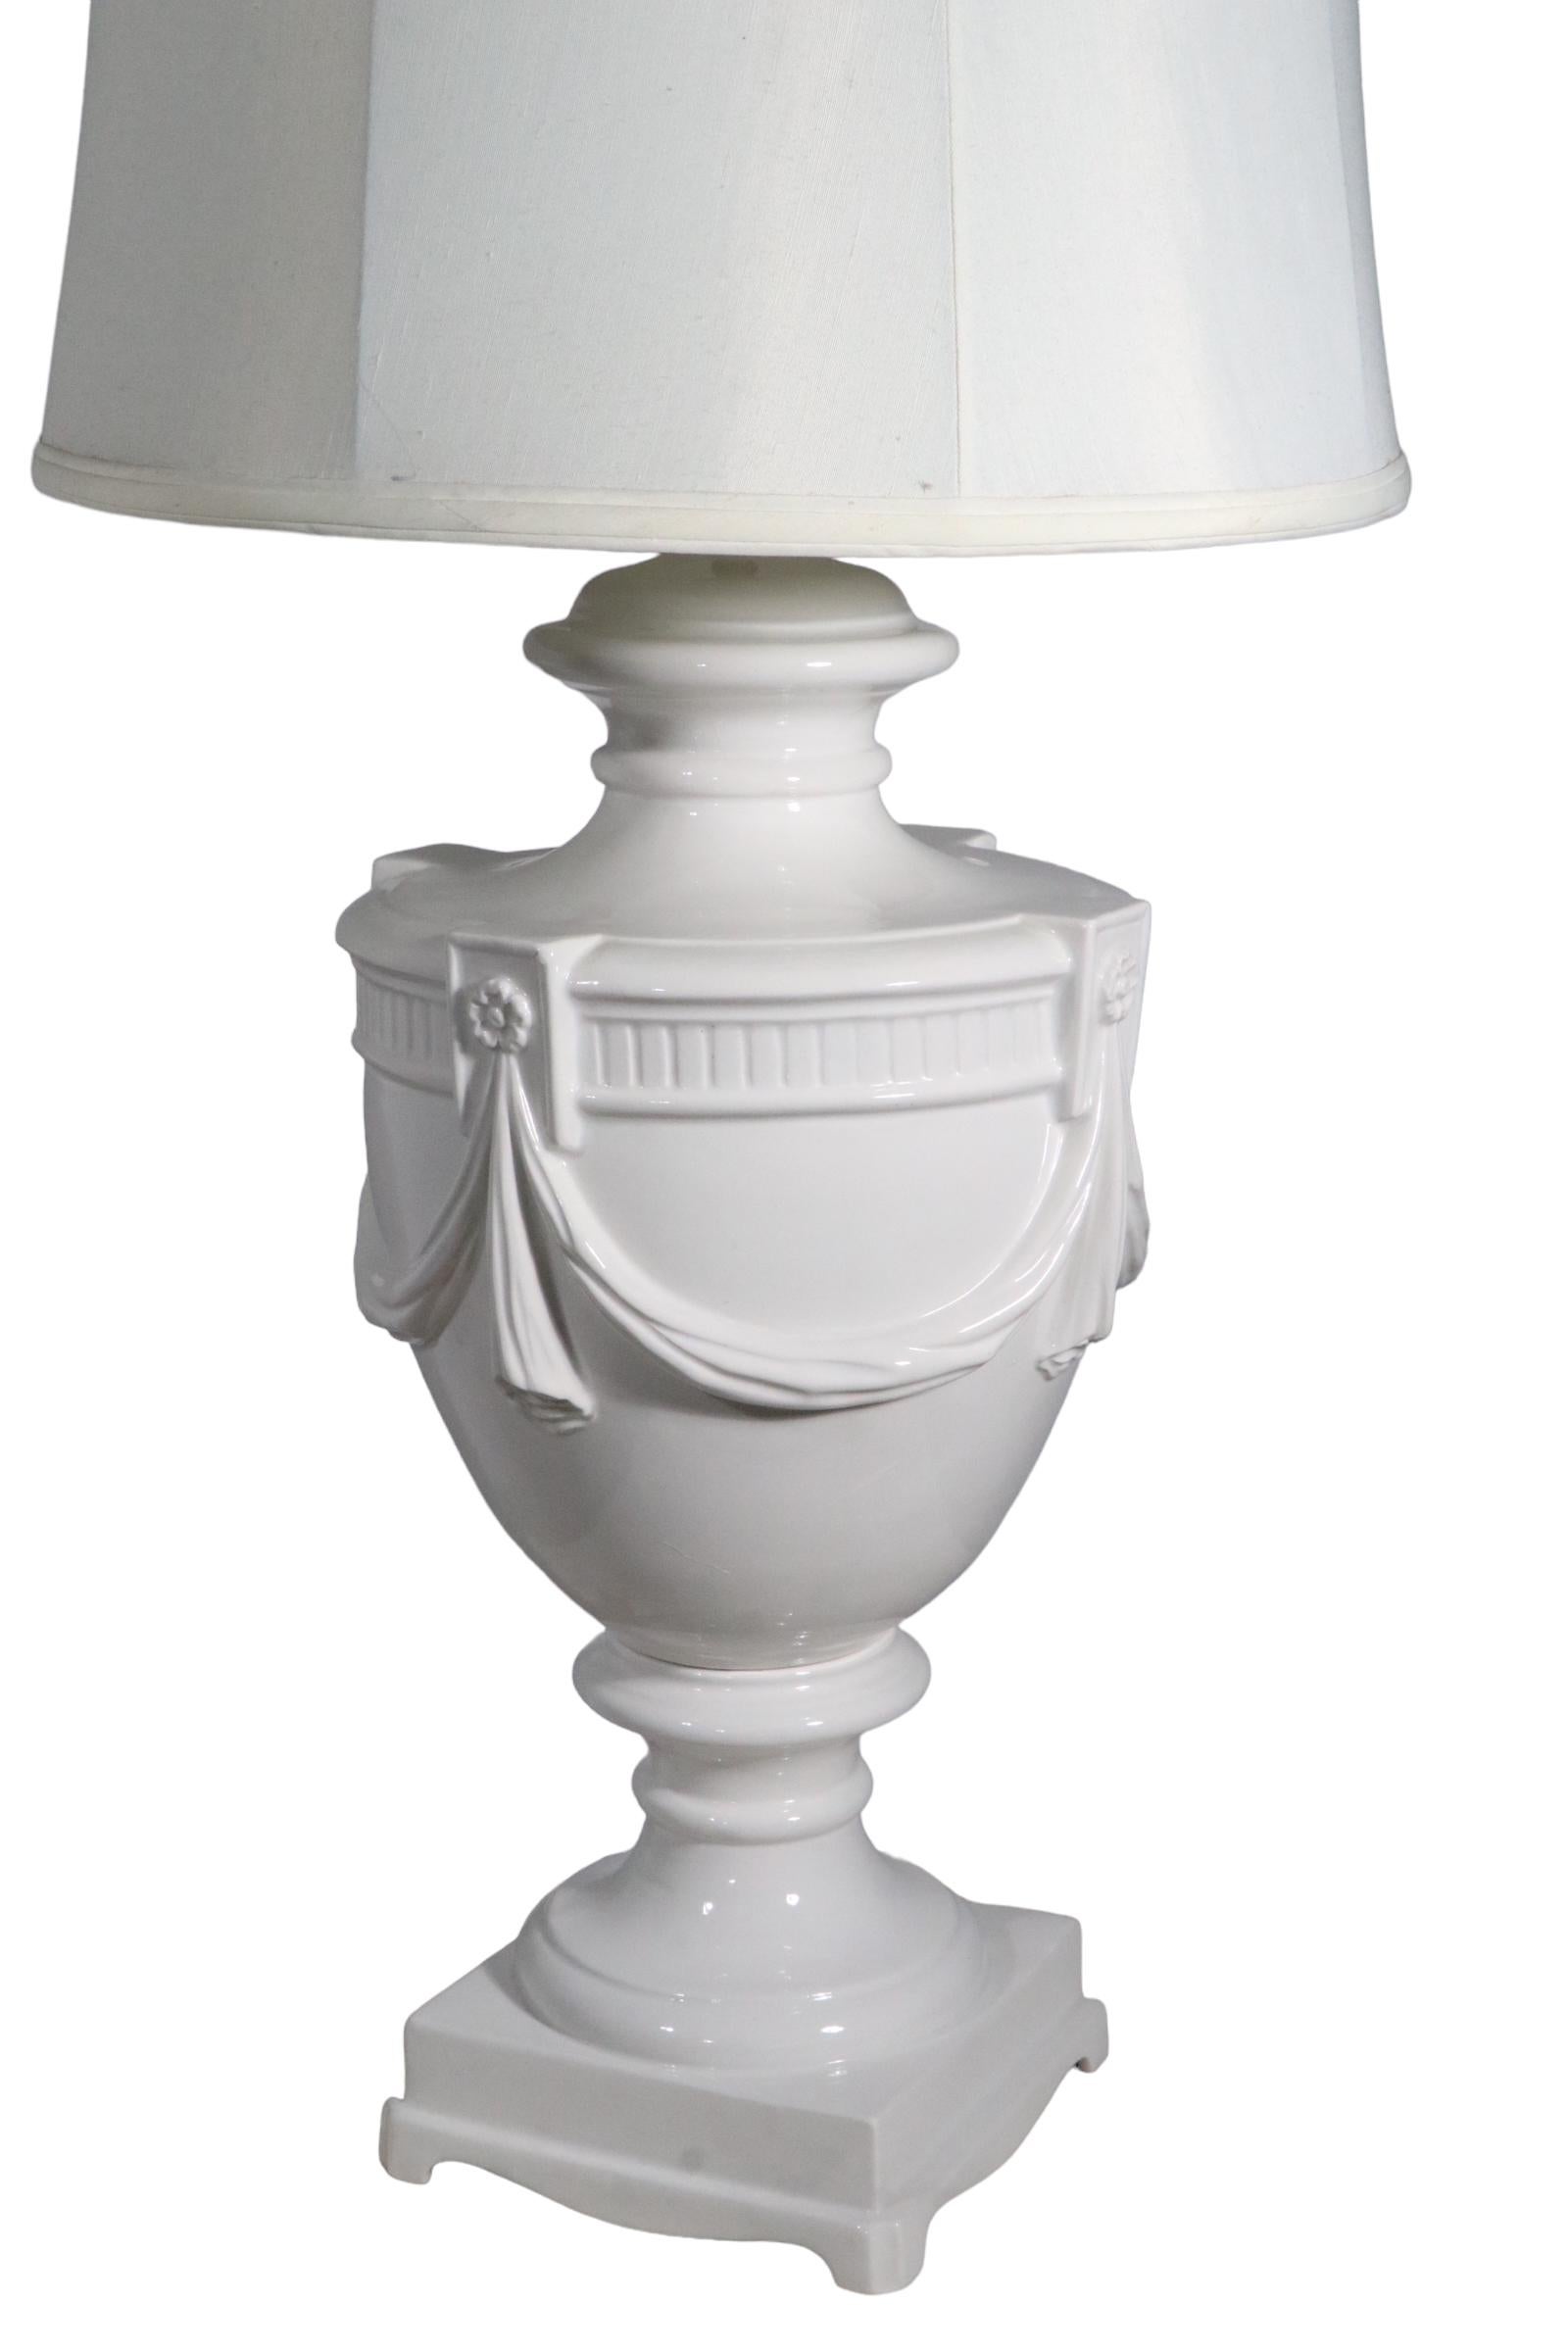 Hollywood Regency White on White Ceramic Urn Form Table Lamp Made in Italy, circa, 1950s-1970s For Sale